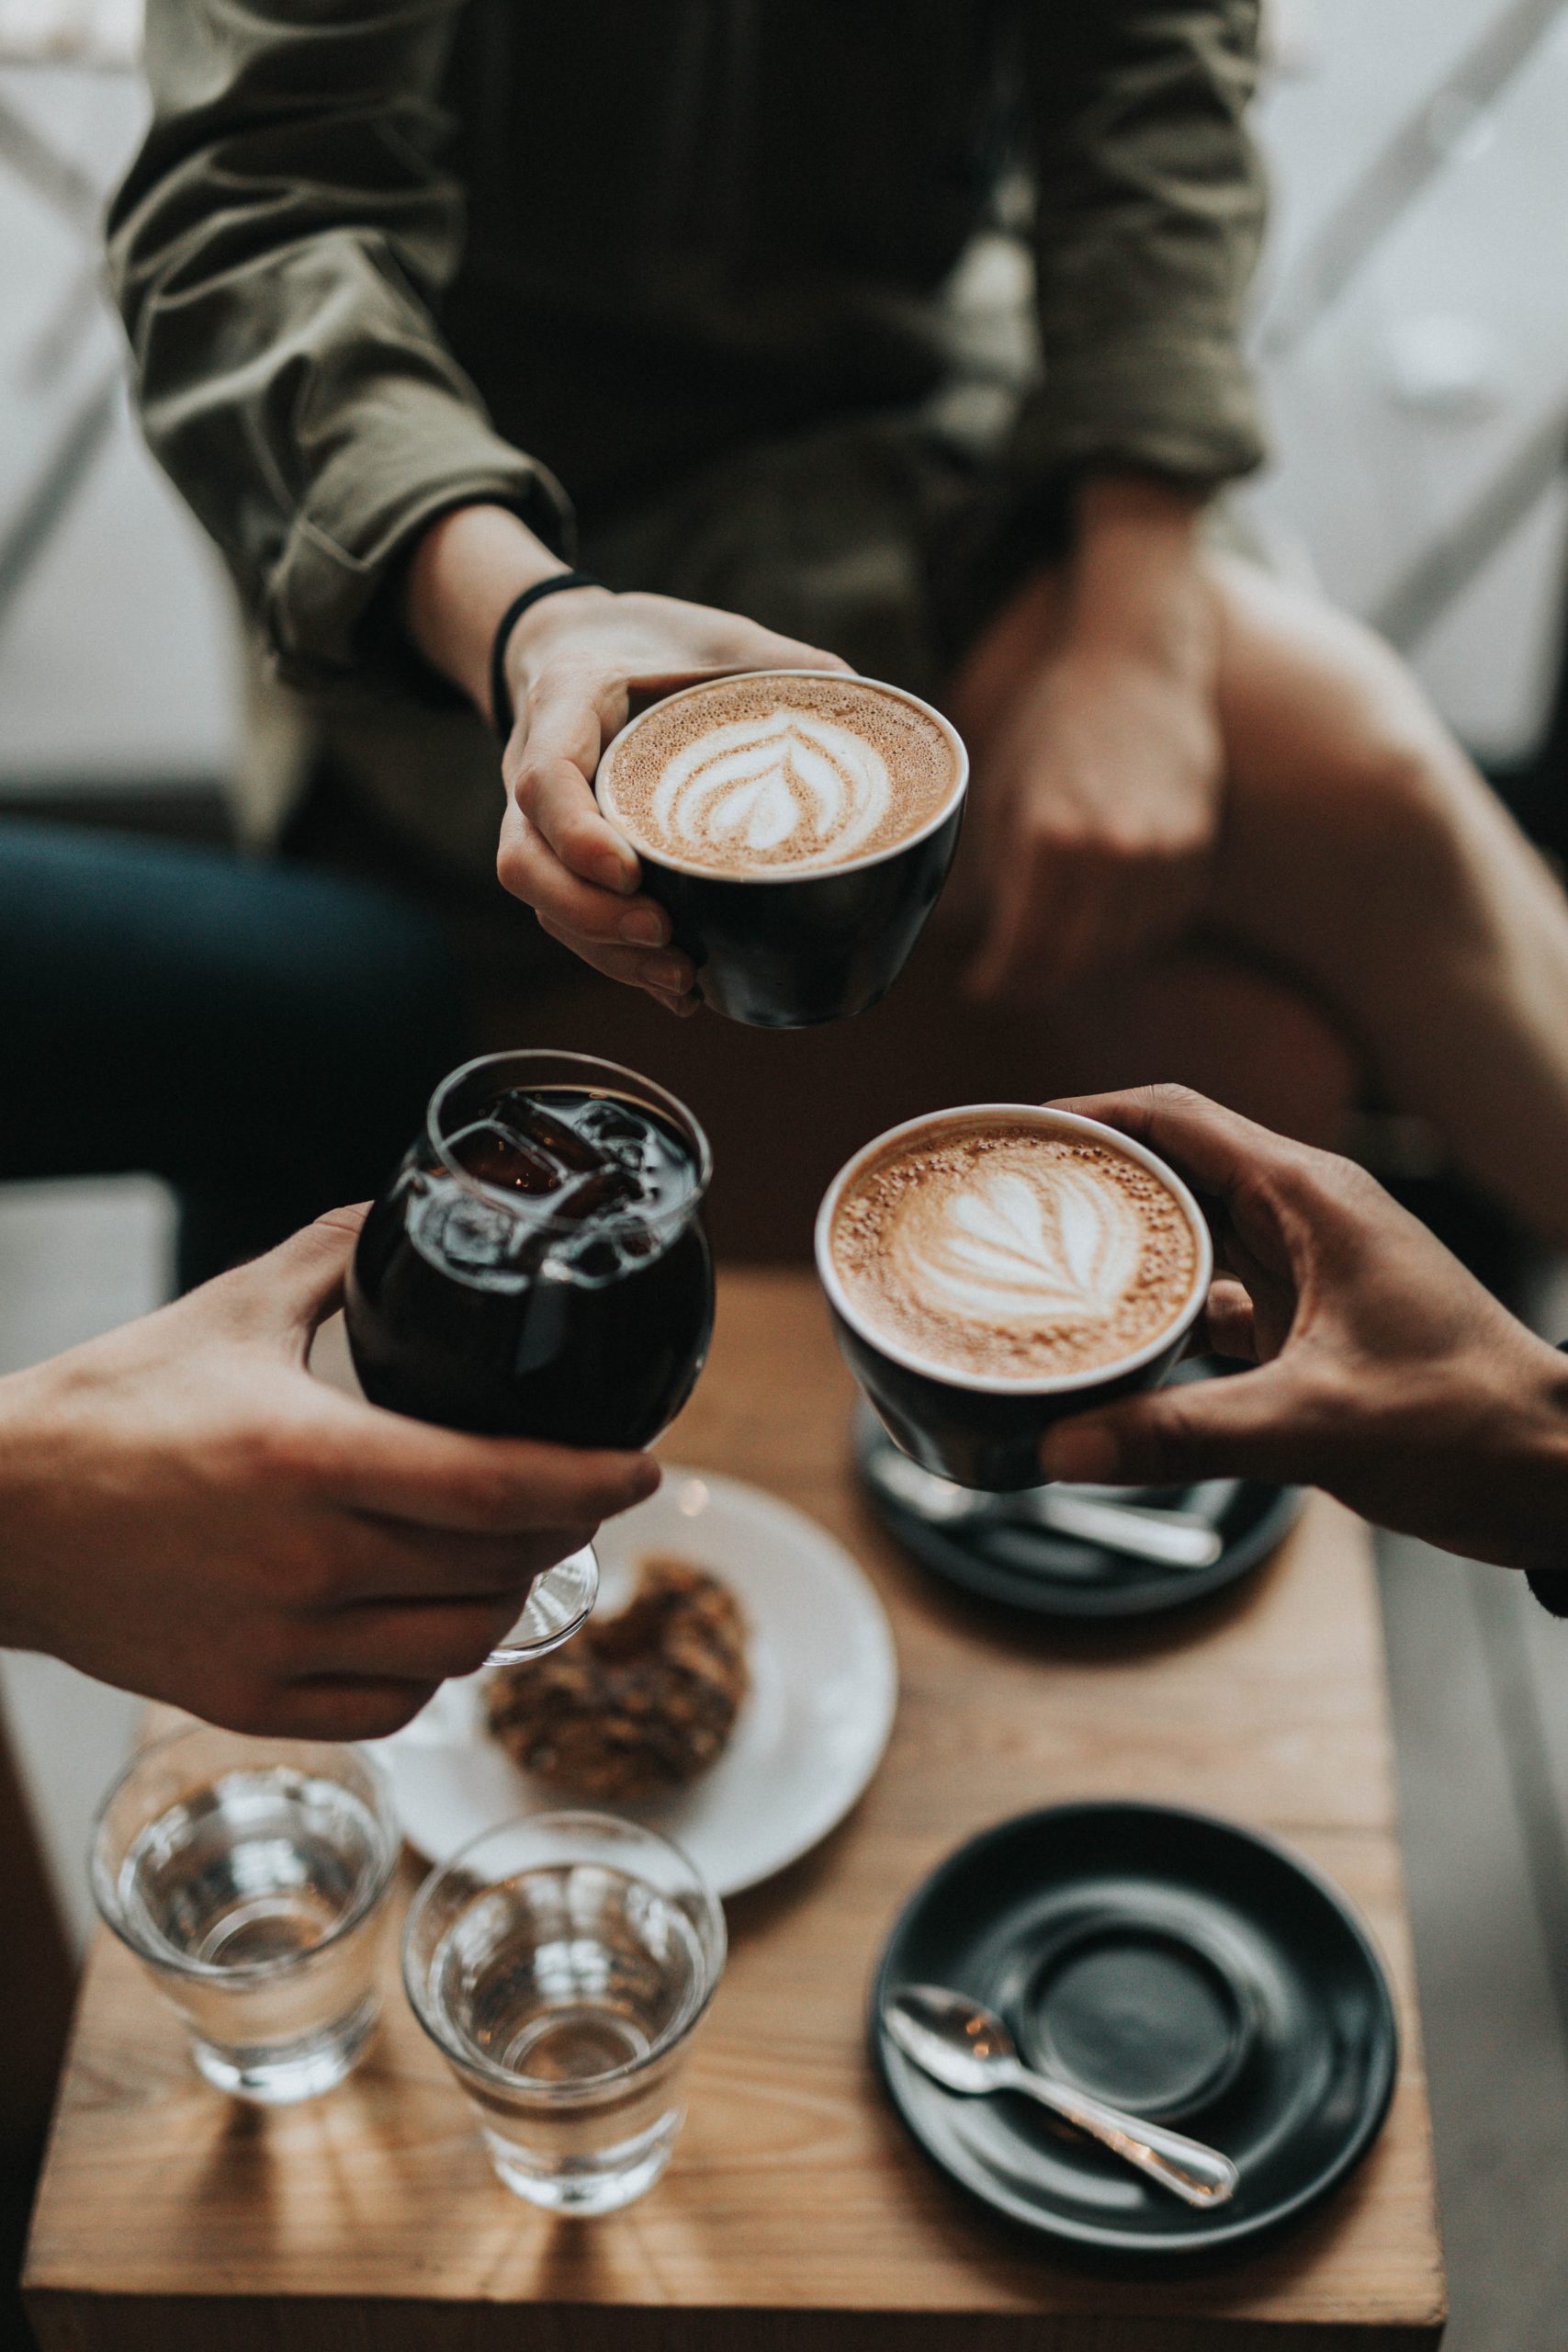 three people's hands holding coffee and other drinks raised in a toast to one another